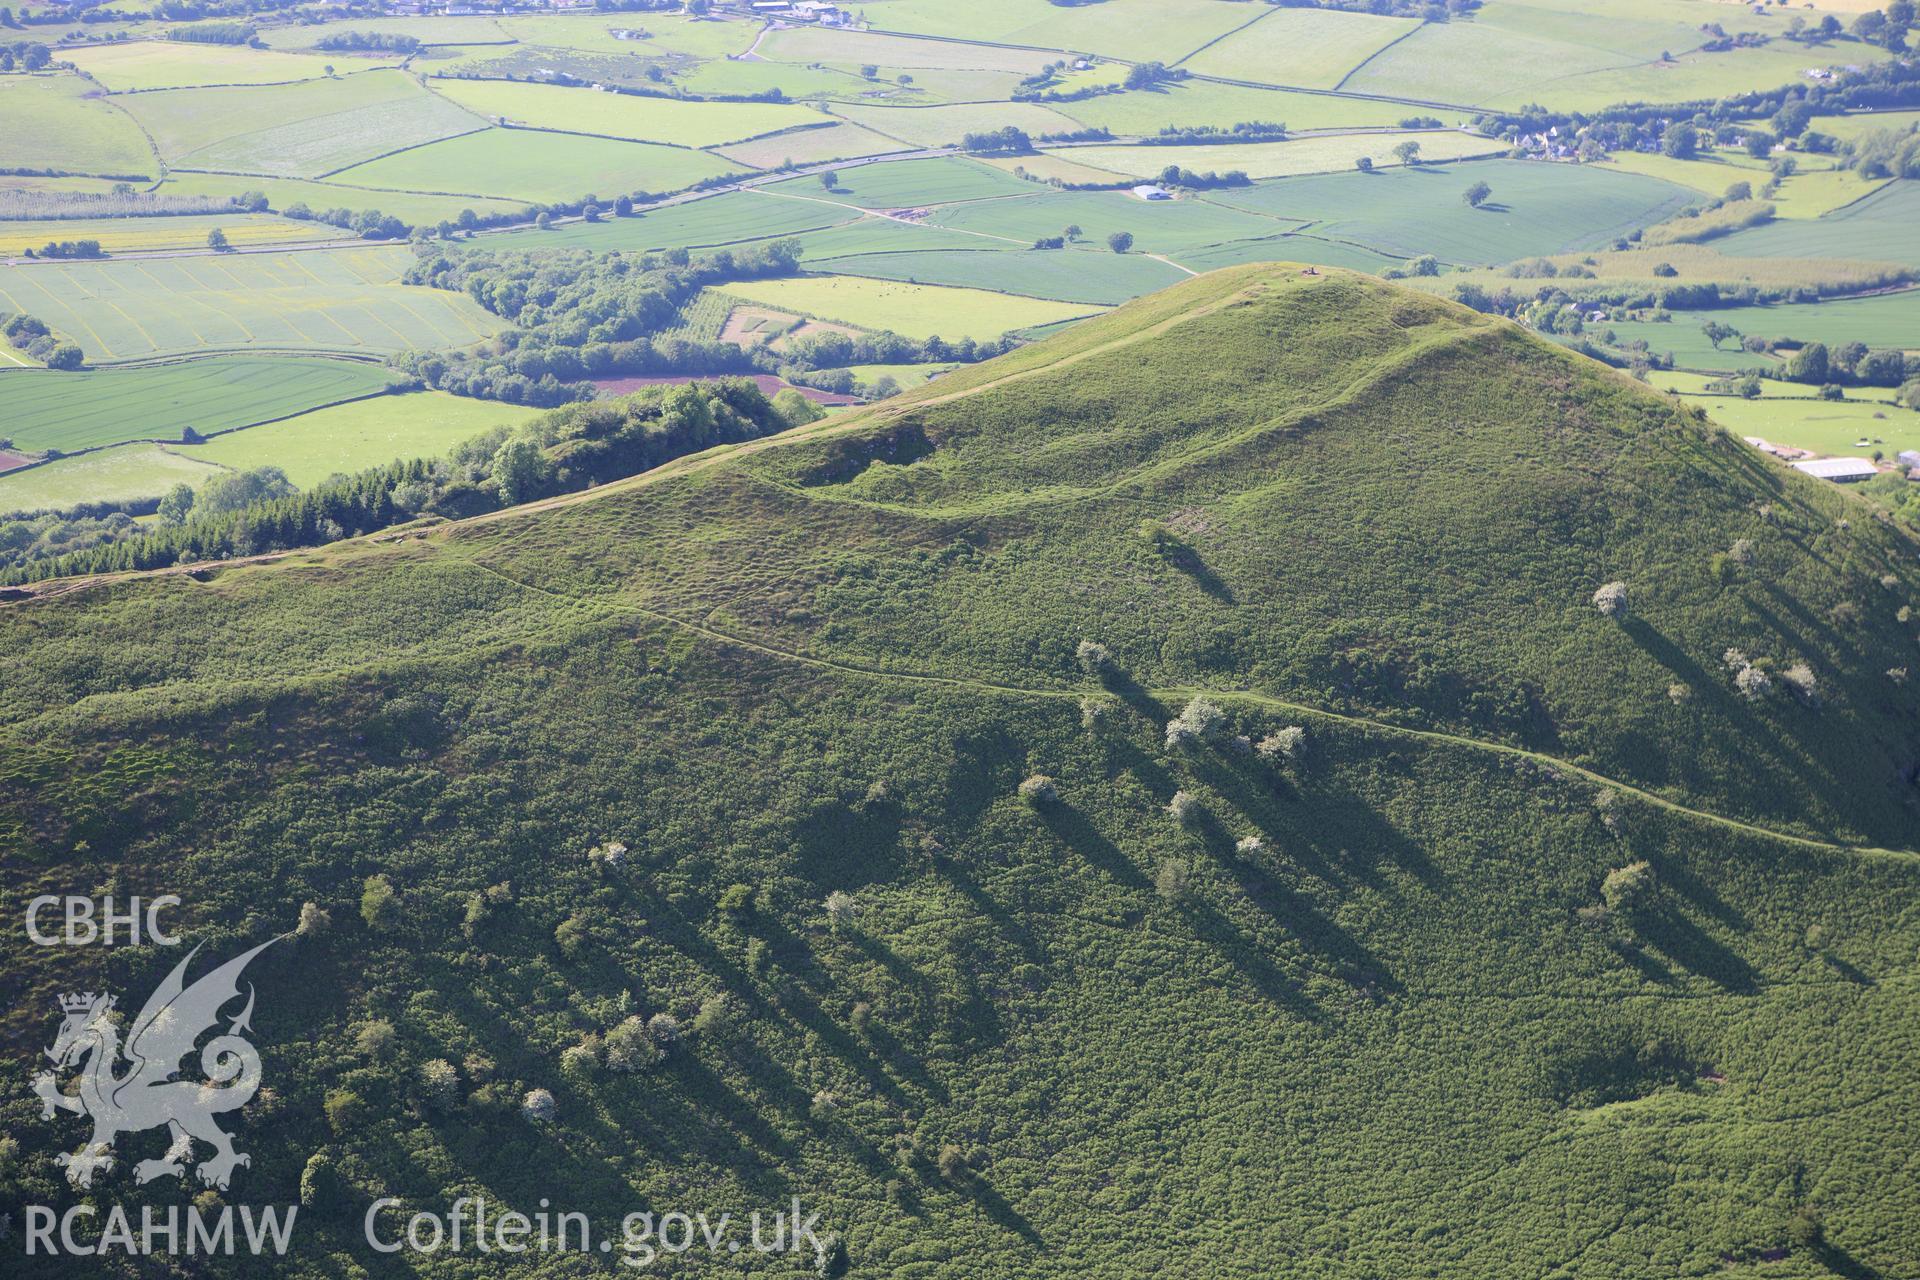 RCAHMW colour oblique aerial photograph of Skirrid Fawr Summit Enclosure. Taken on 11 June 2009 by Toby Driver